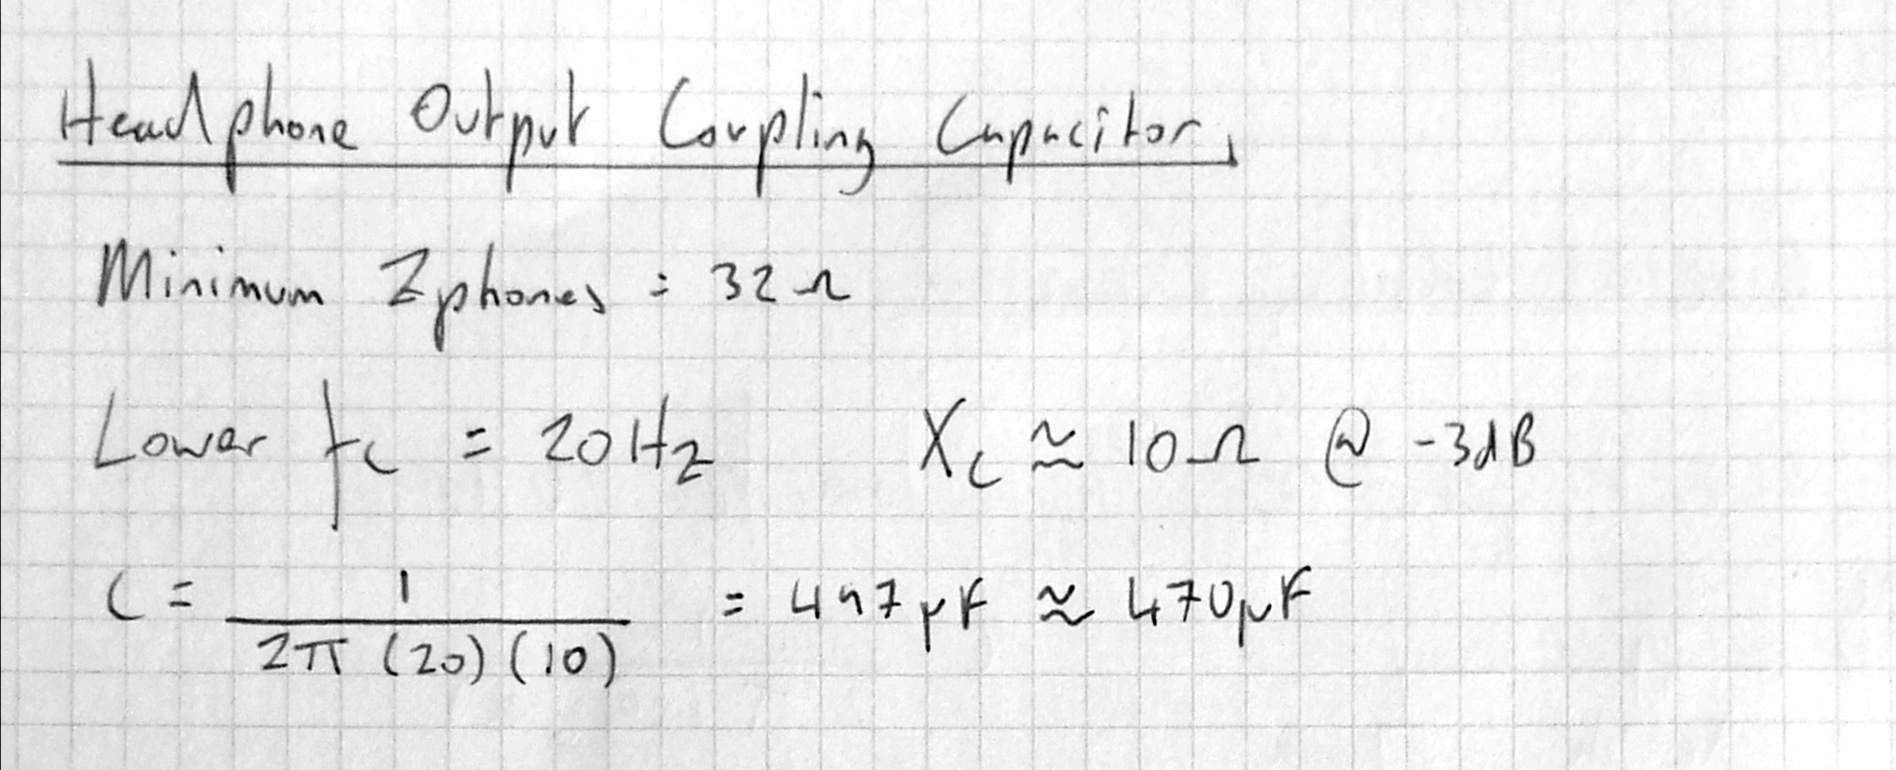 Headphone output coupling capacitor calculation